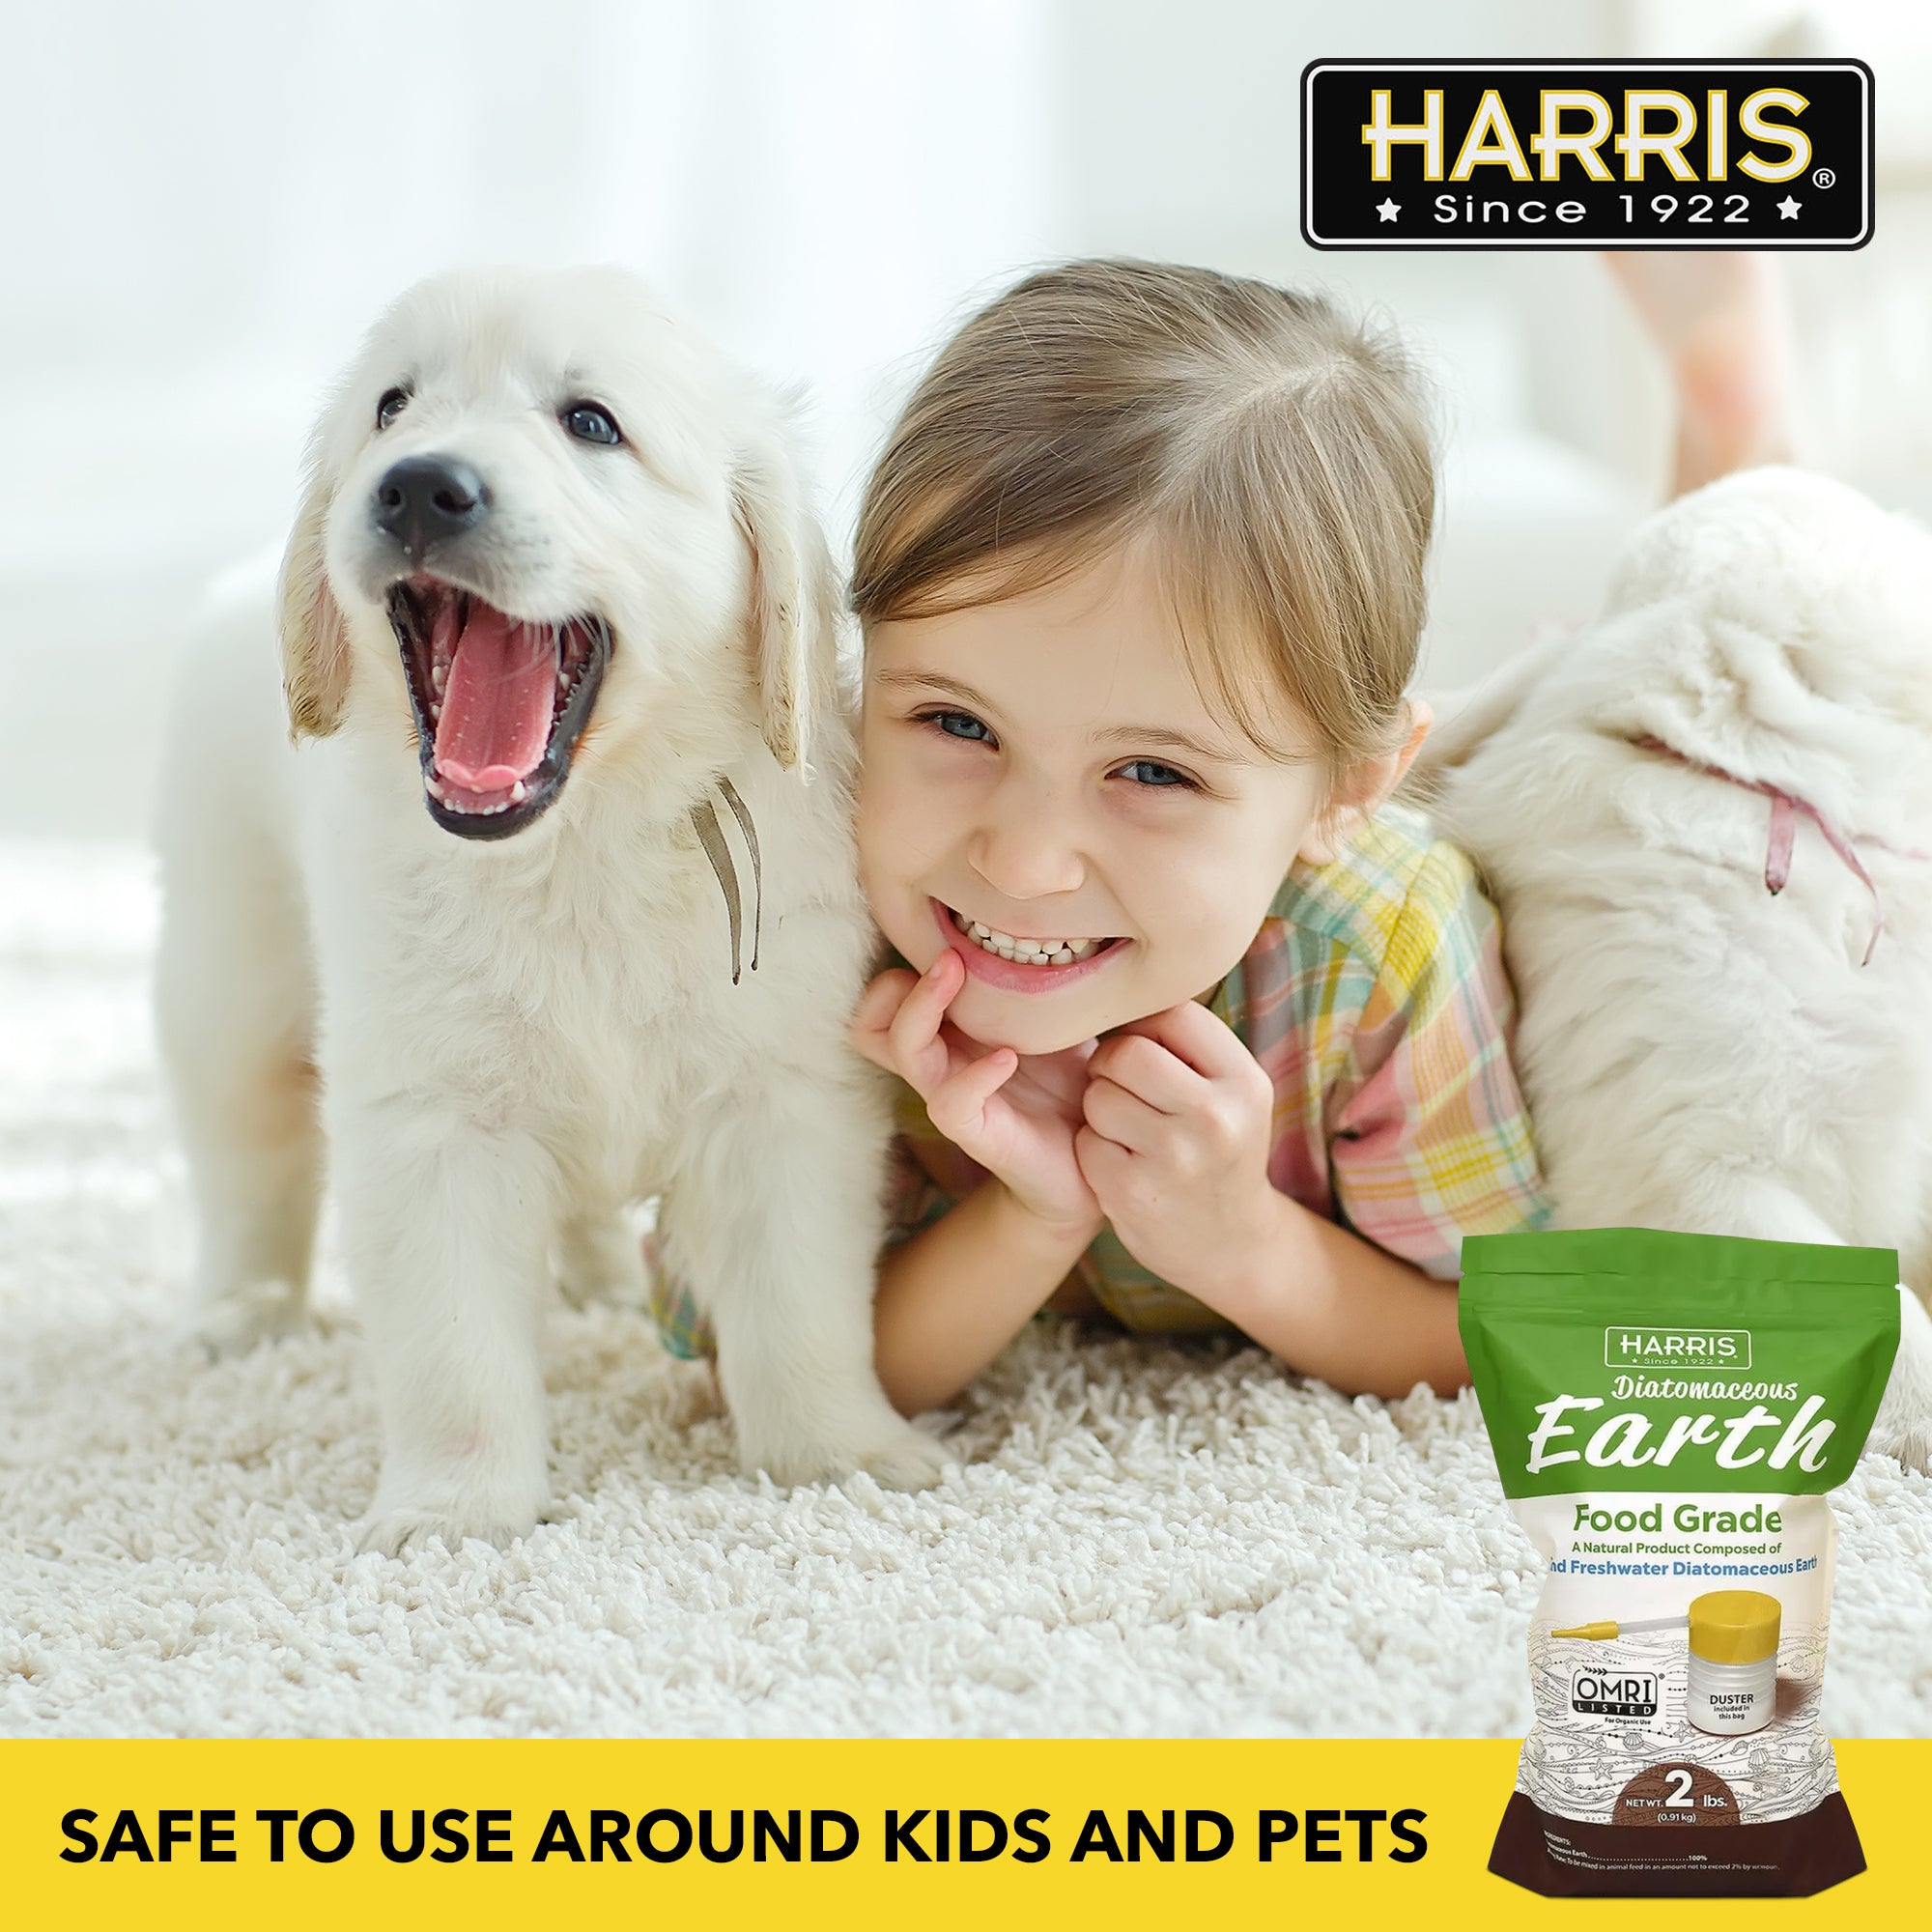  HARRIS Diatomaceous Earth Food Grade, 2lb with Powder Duster  Included in The Bag : Pet Supplies